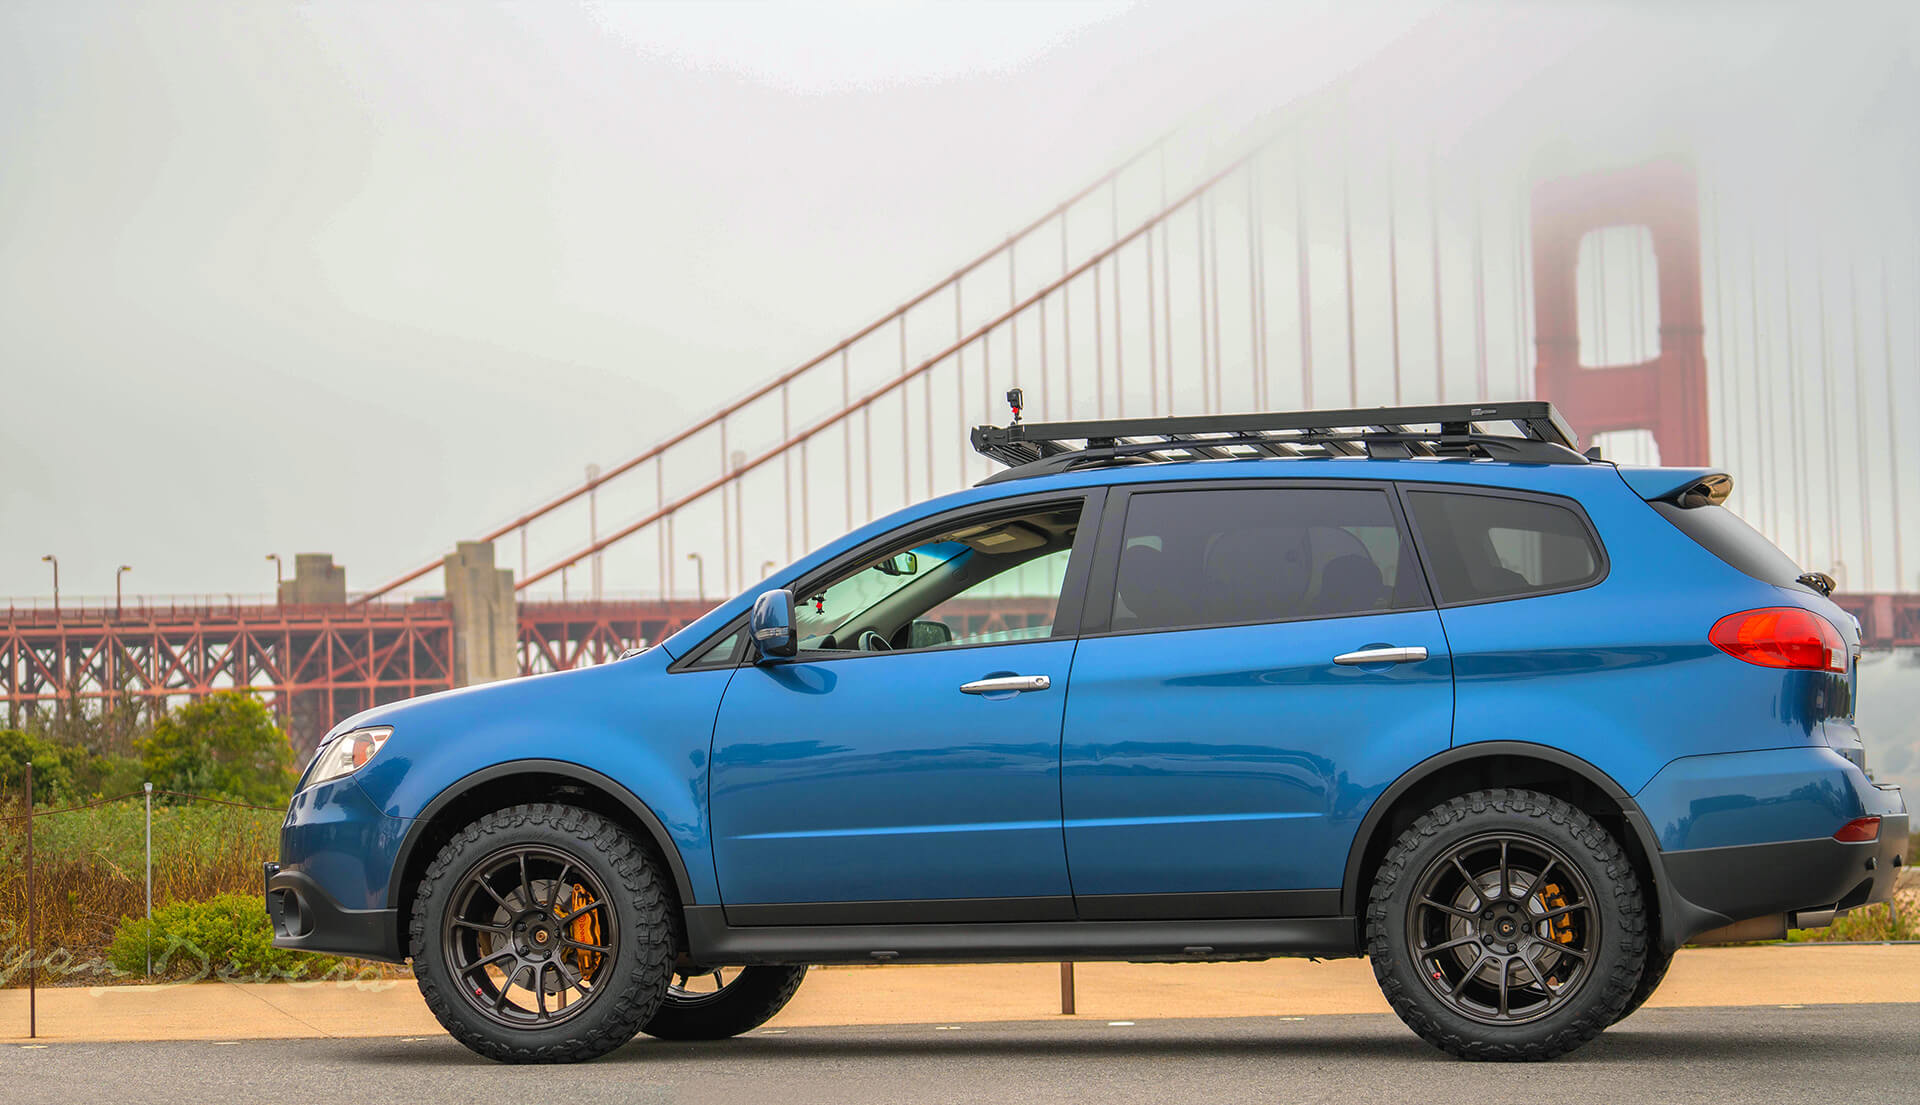 The Big Subie - a Lifted Subaru Tribeca with an Off-road Attitude